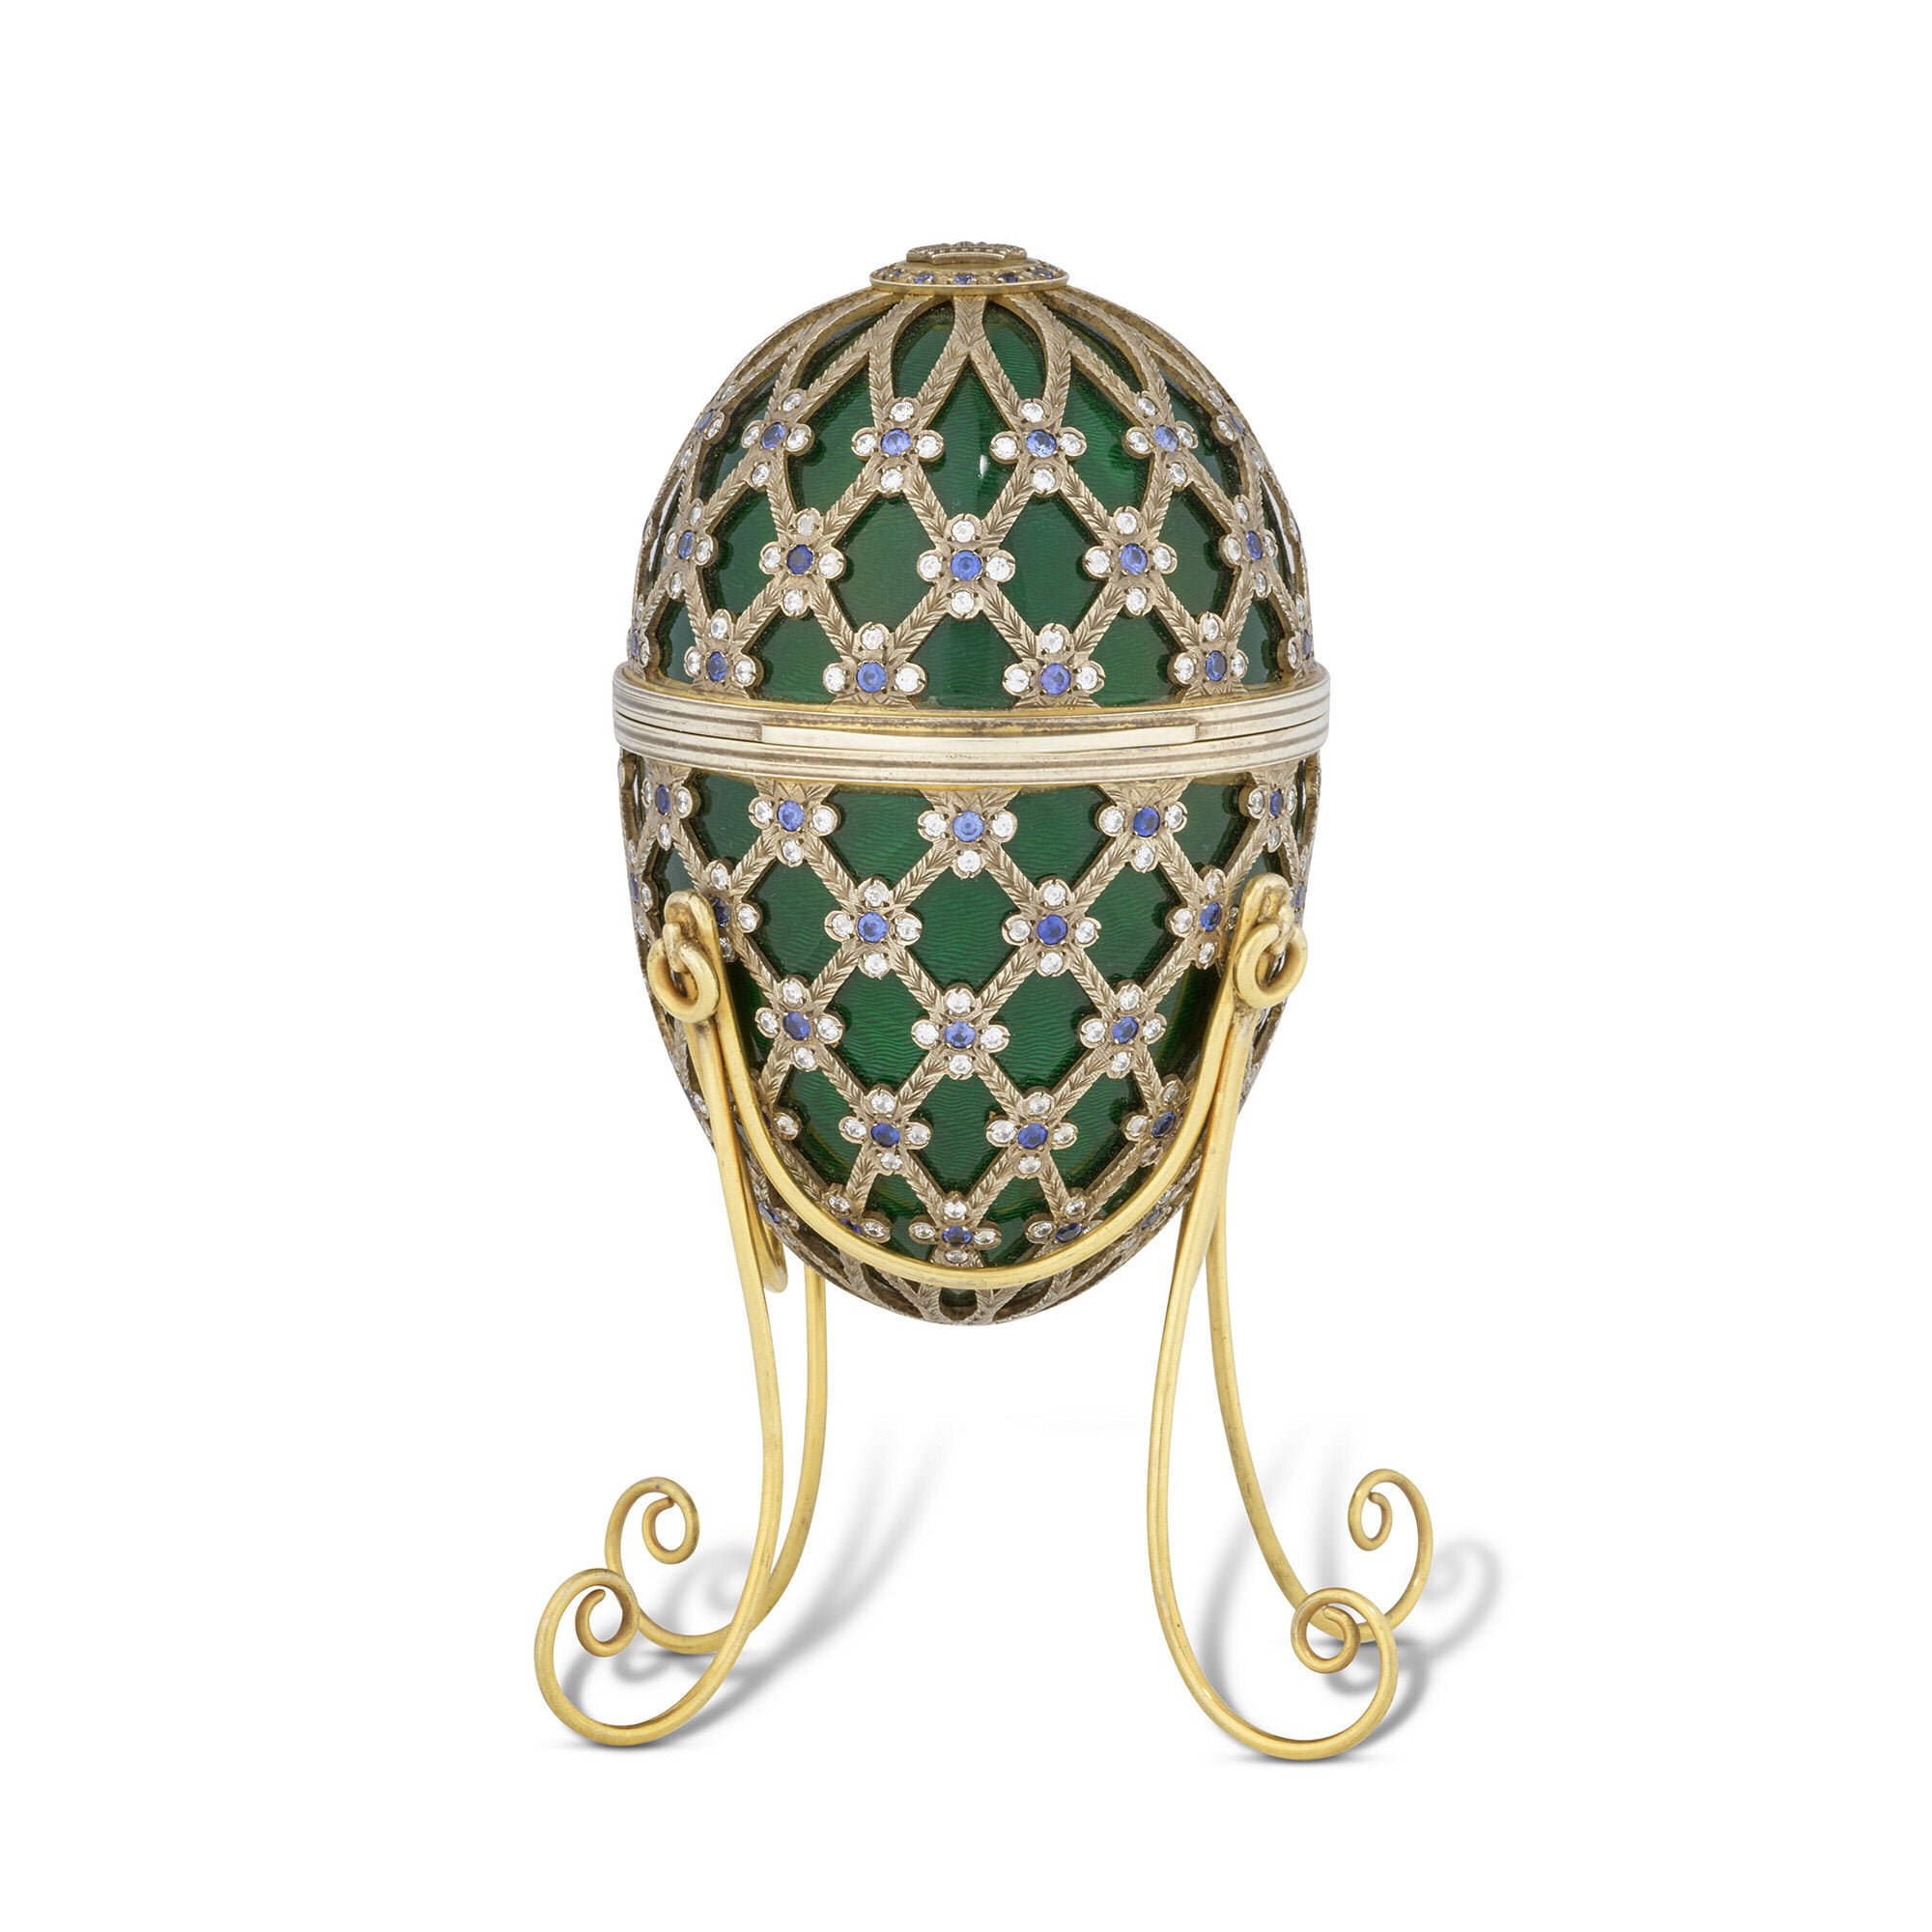 OCTOPUSSY (1983) A SWAROVSKI CRYSTAL-MOUNTED, GREEN ENAMEL AND GOLD-PLATED PROP EGG COMMISSIONED FROM ASPREY, LONDON 